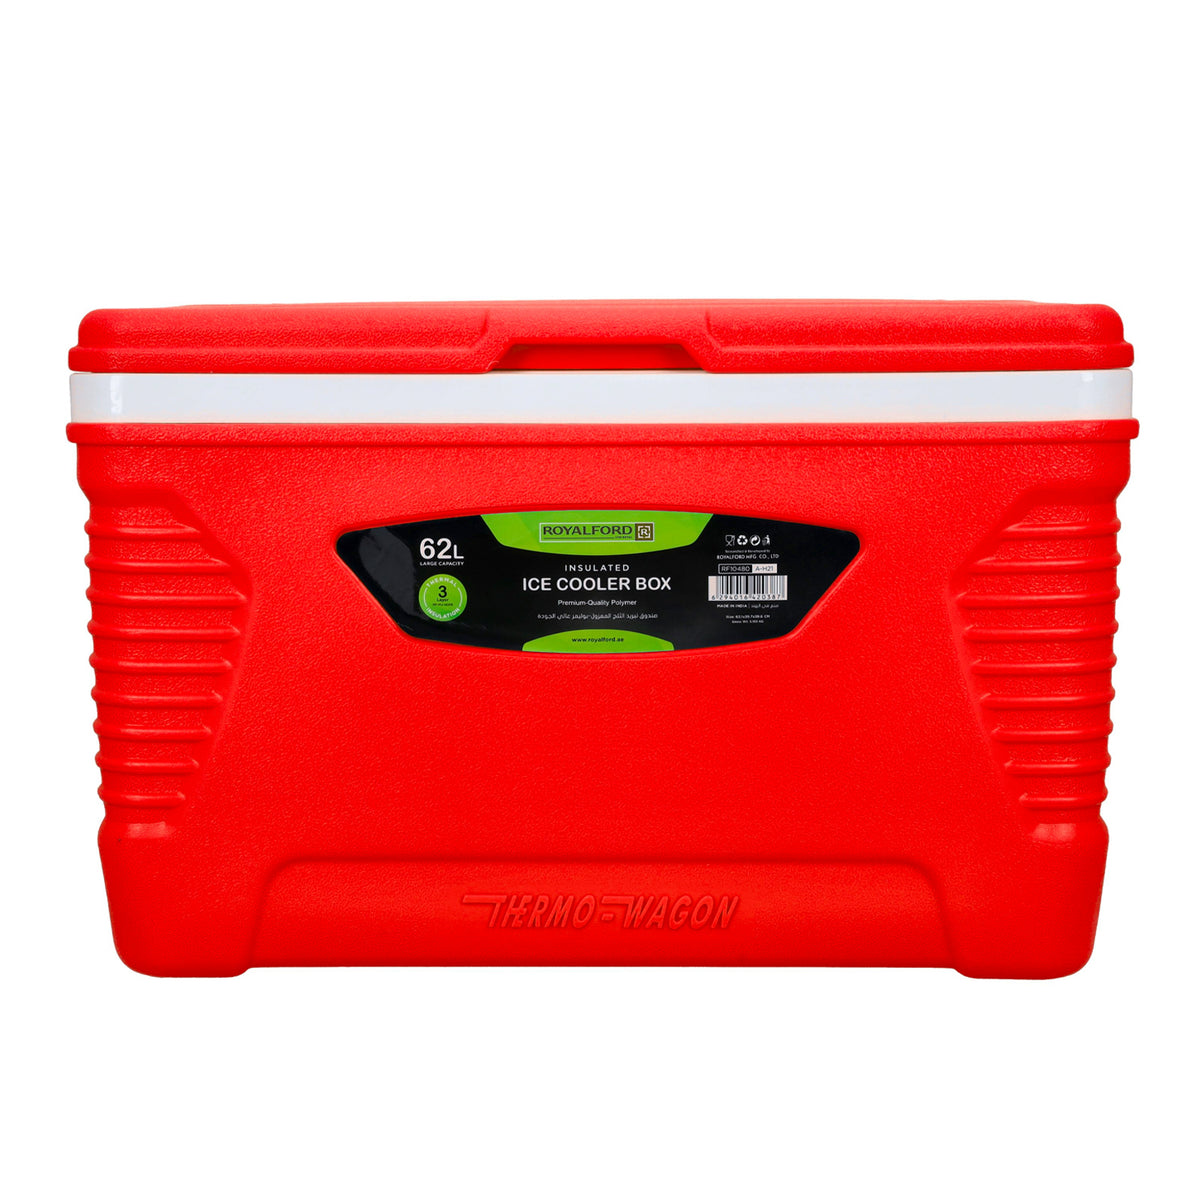 Royalford 62L Red Insulated Ice Cooler Box Coolers